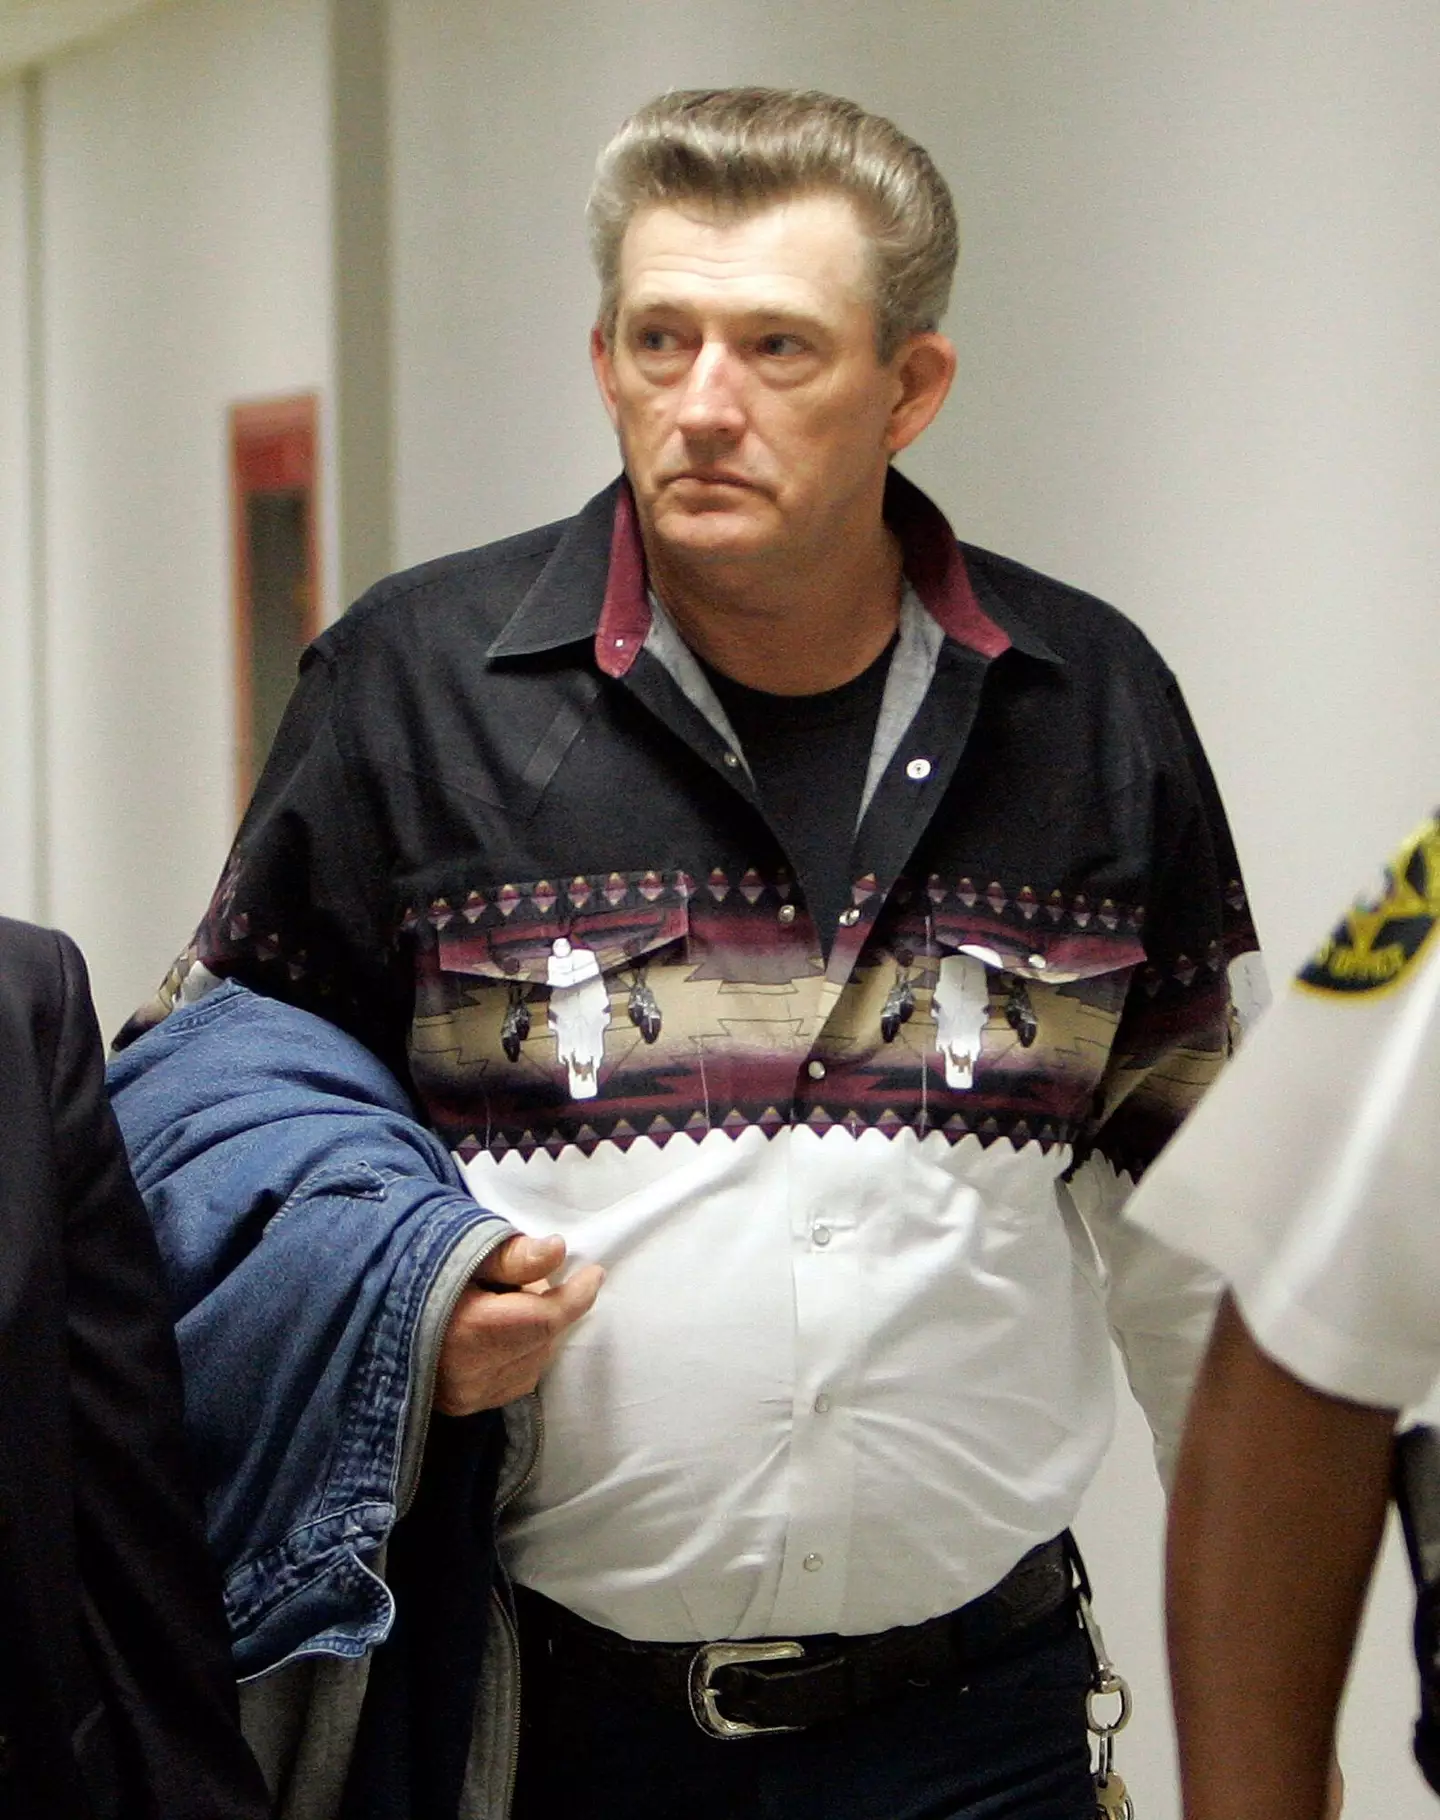 Donald Hogan previously pleaded guilty to rape and spent six months in jail.